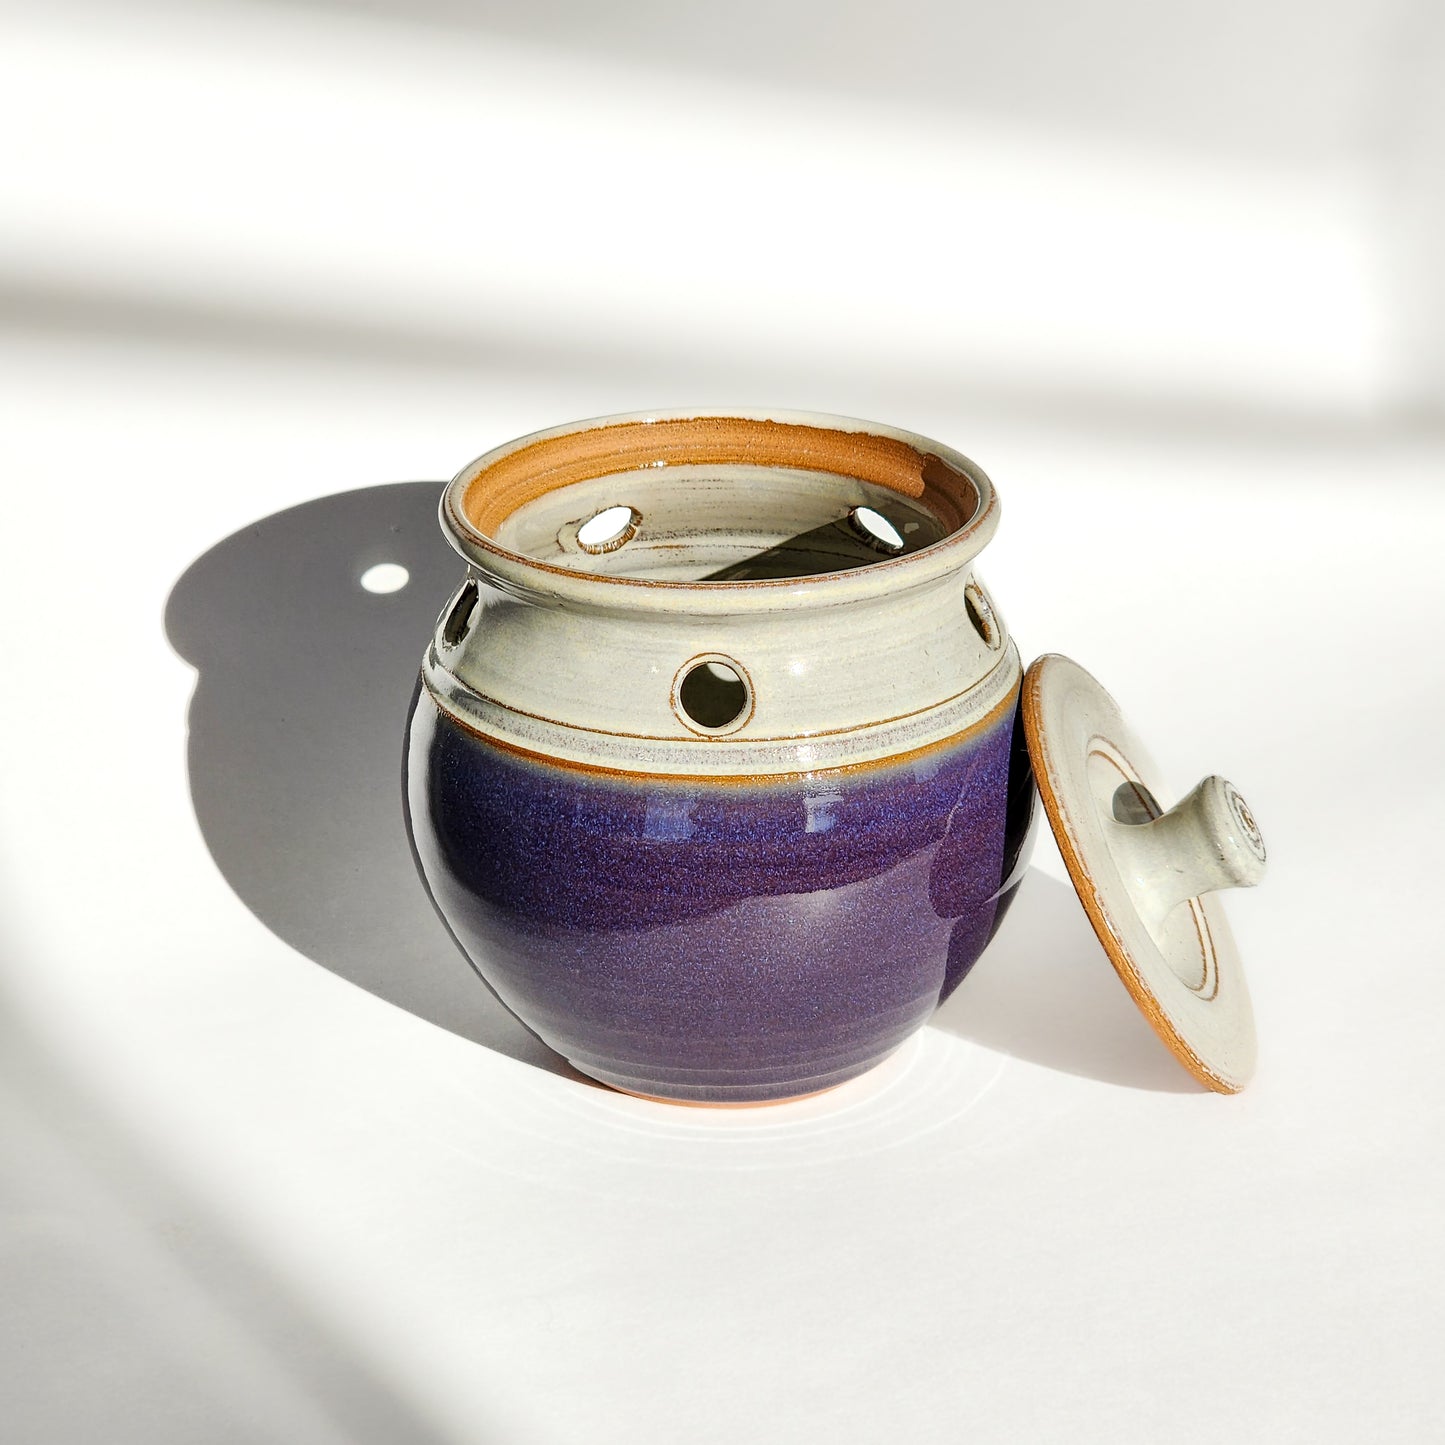 Image: A purple ceramic garlic keeper, ideal for storing garlic bulbs and adding a pop of color to the kitchen.